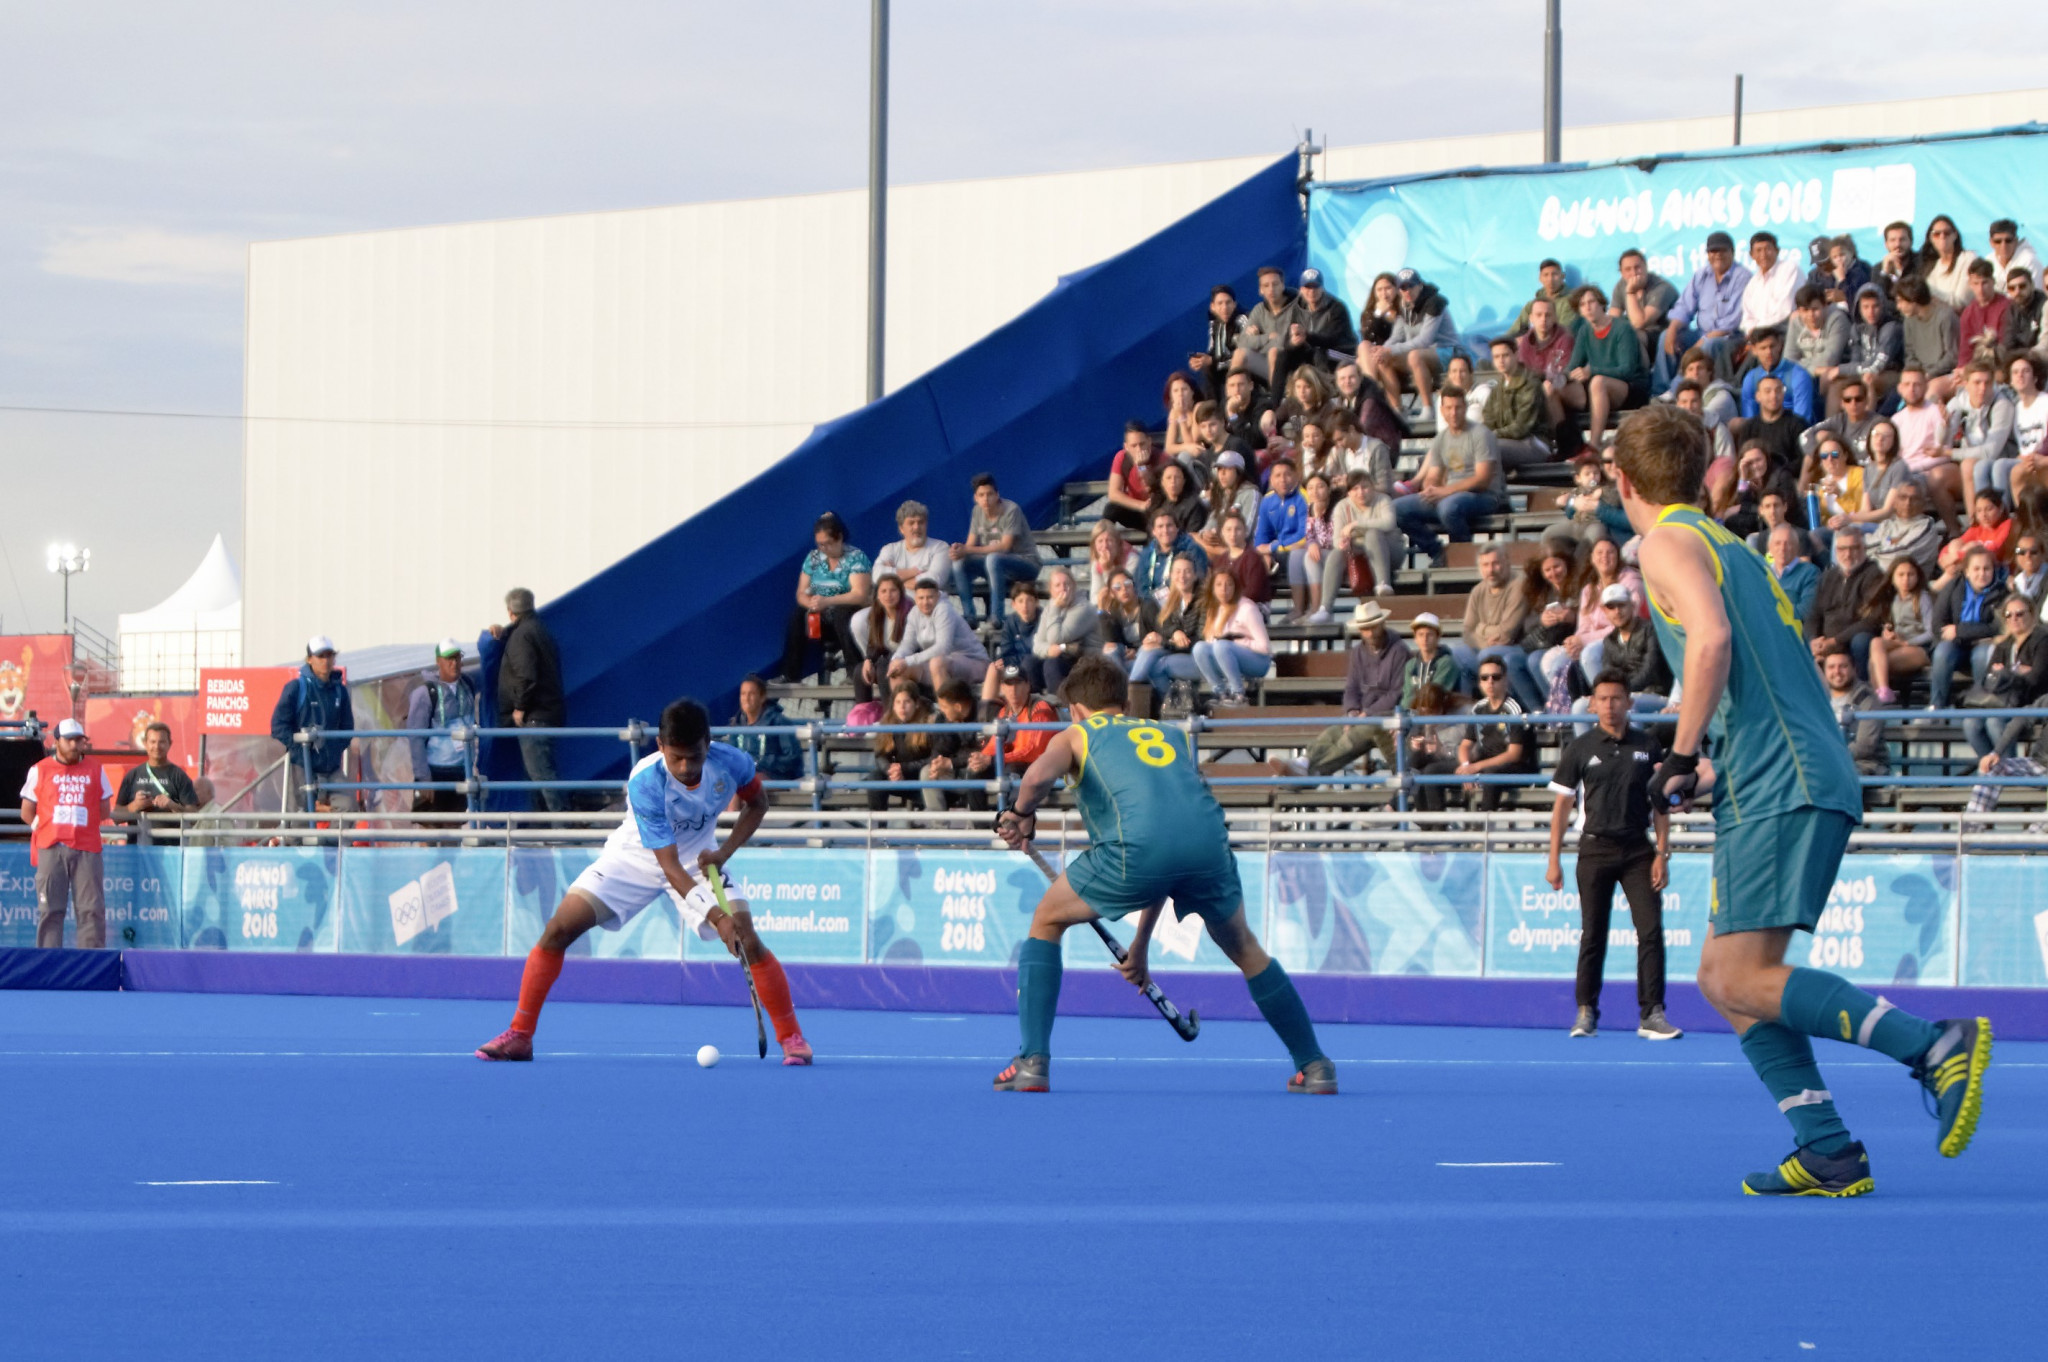 Hockey5s was contested at the 2018 Summer Youth Olympic Games in Buenos Aires and proved to be a popular attraction ©Getty Images